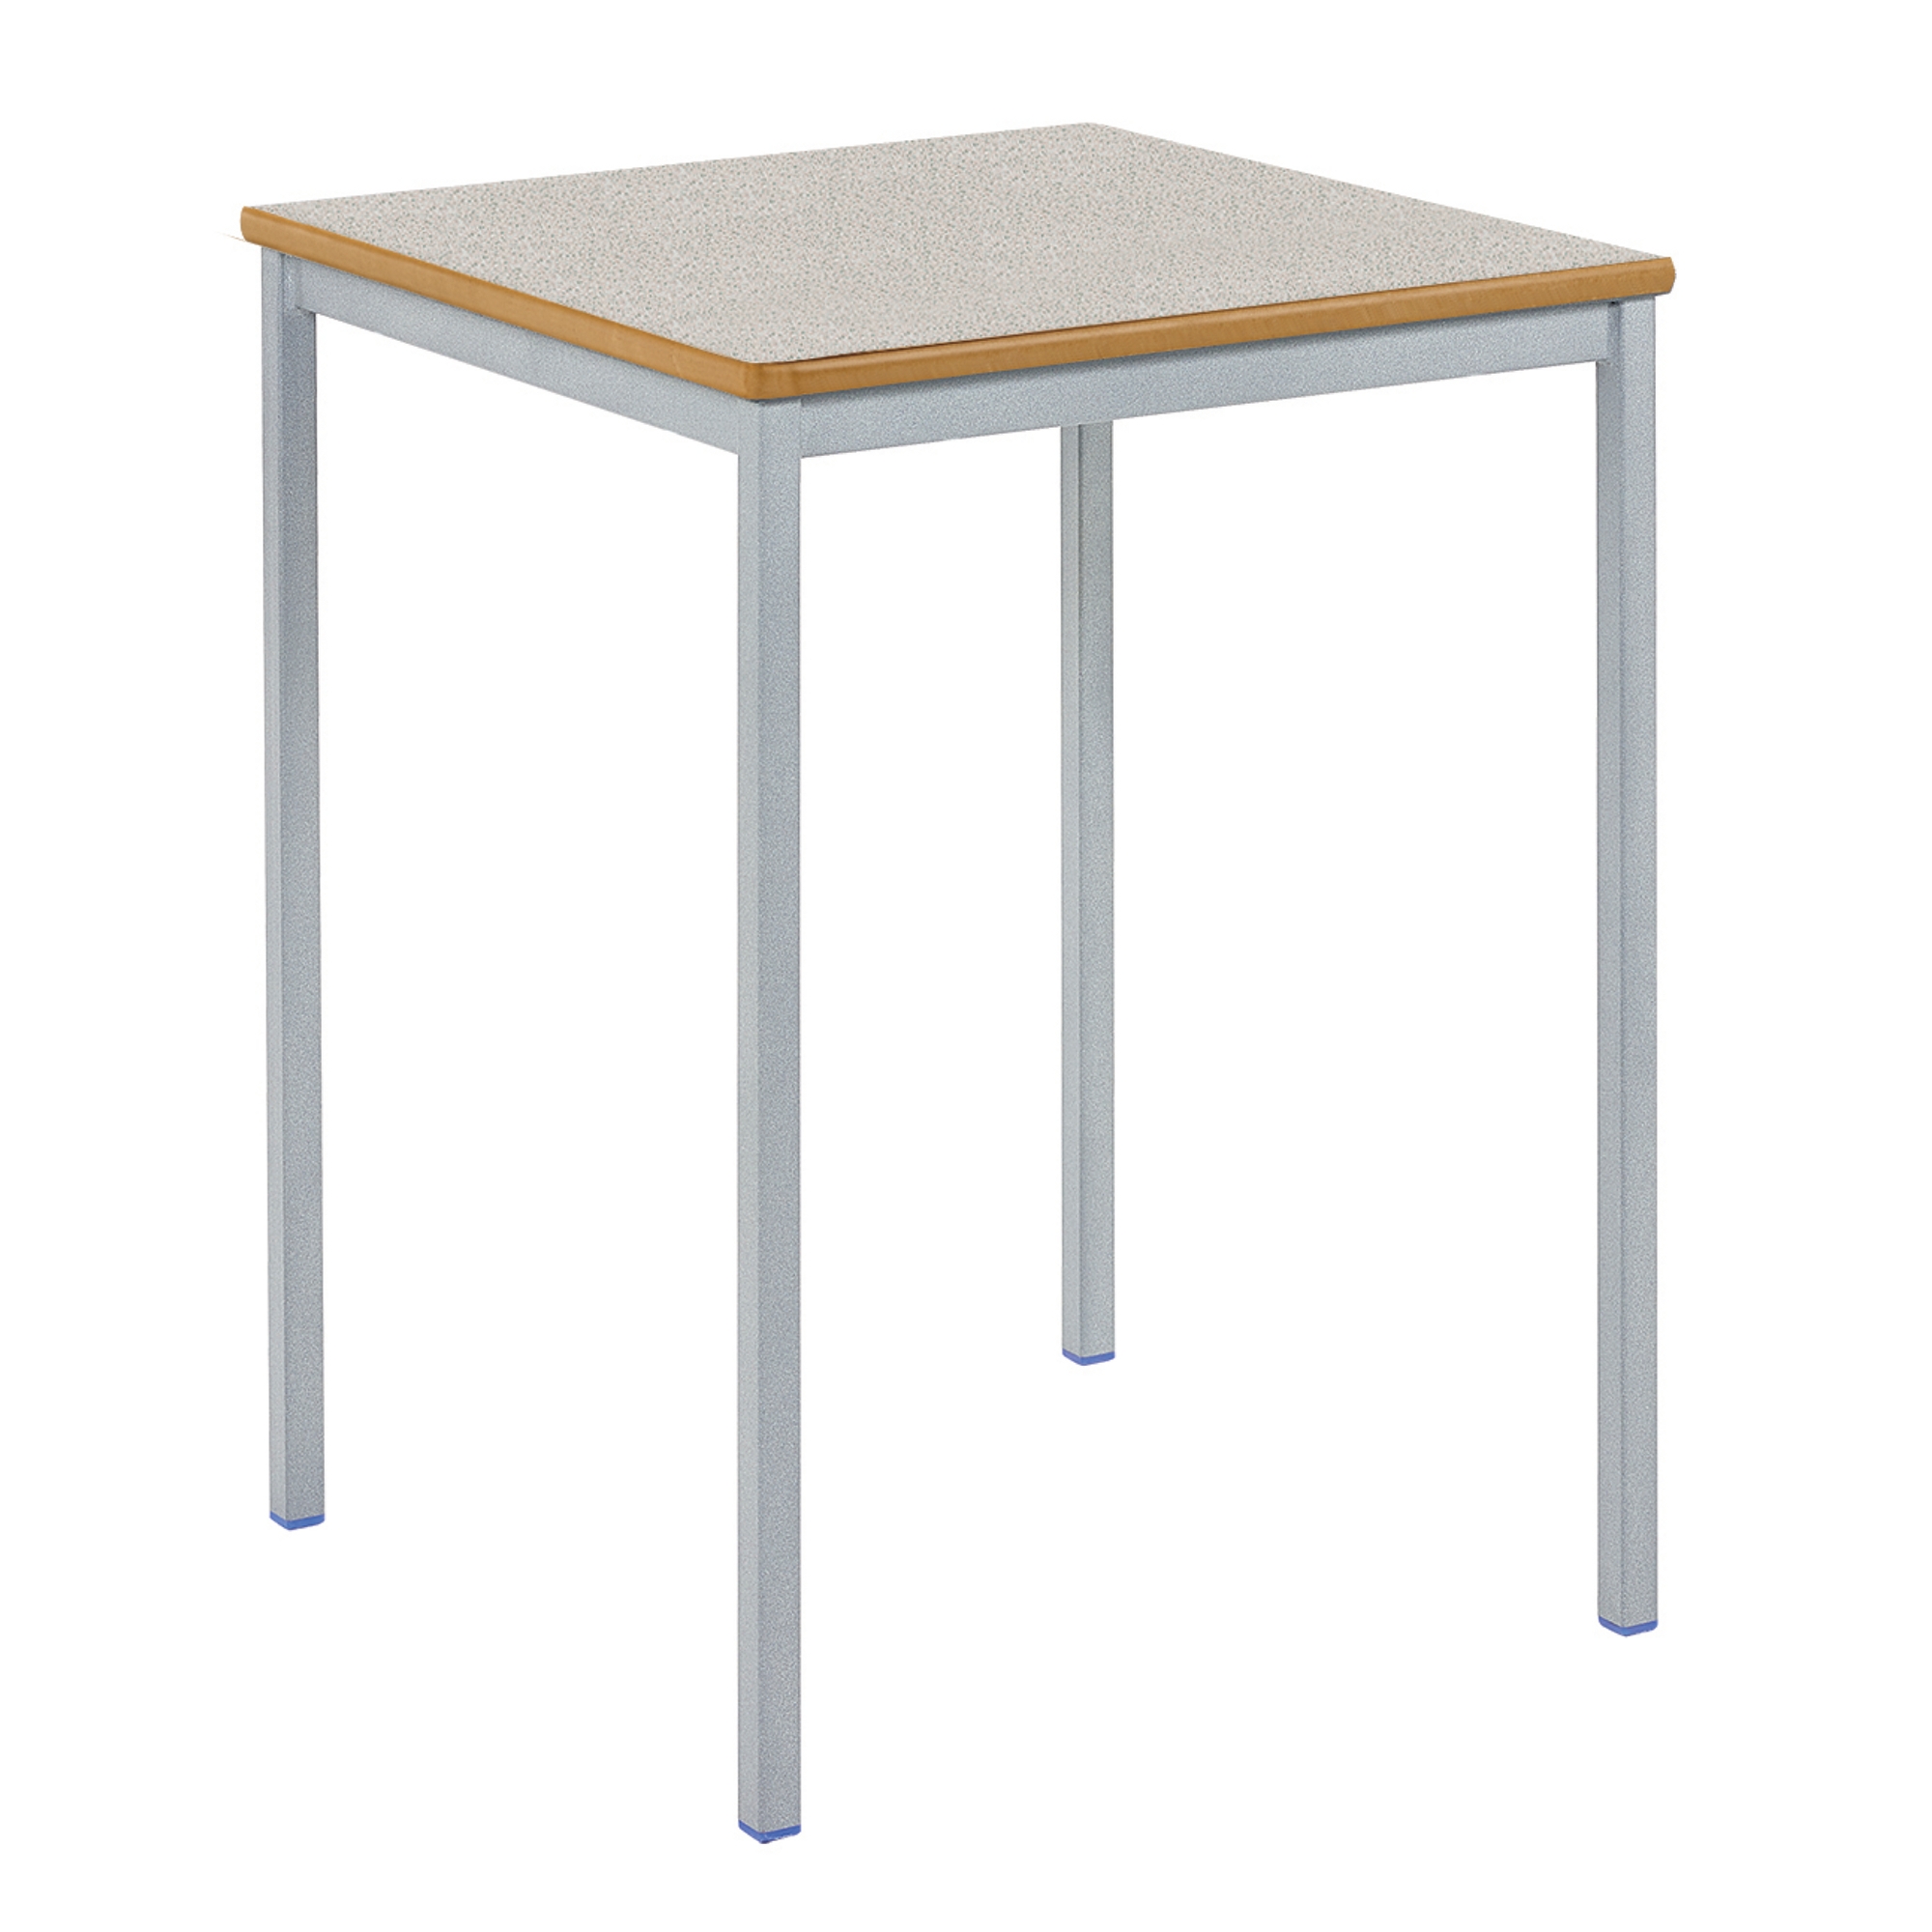 Classmates Square Fully Welded Classroom Table - 600 x 600 x 710mm - Ailsa